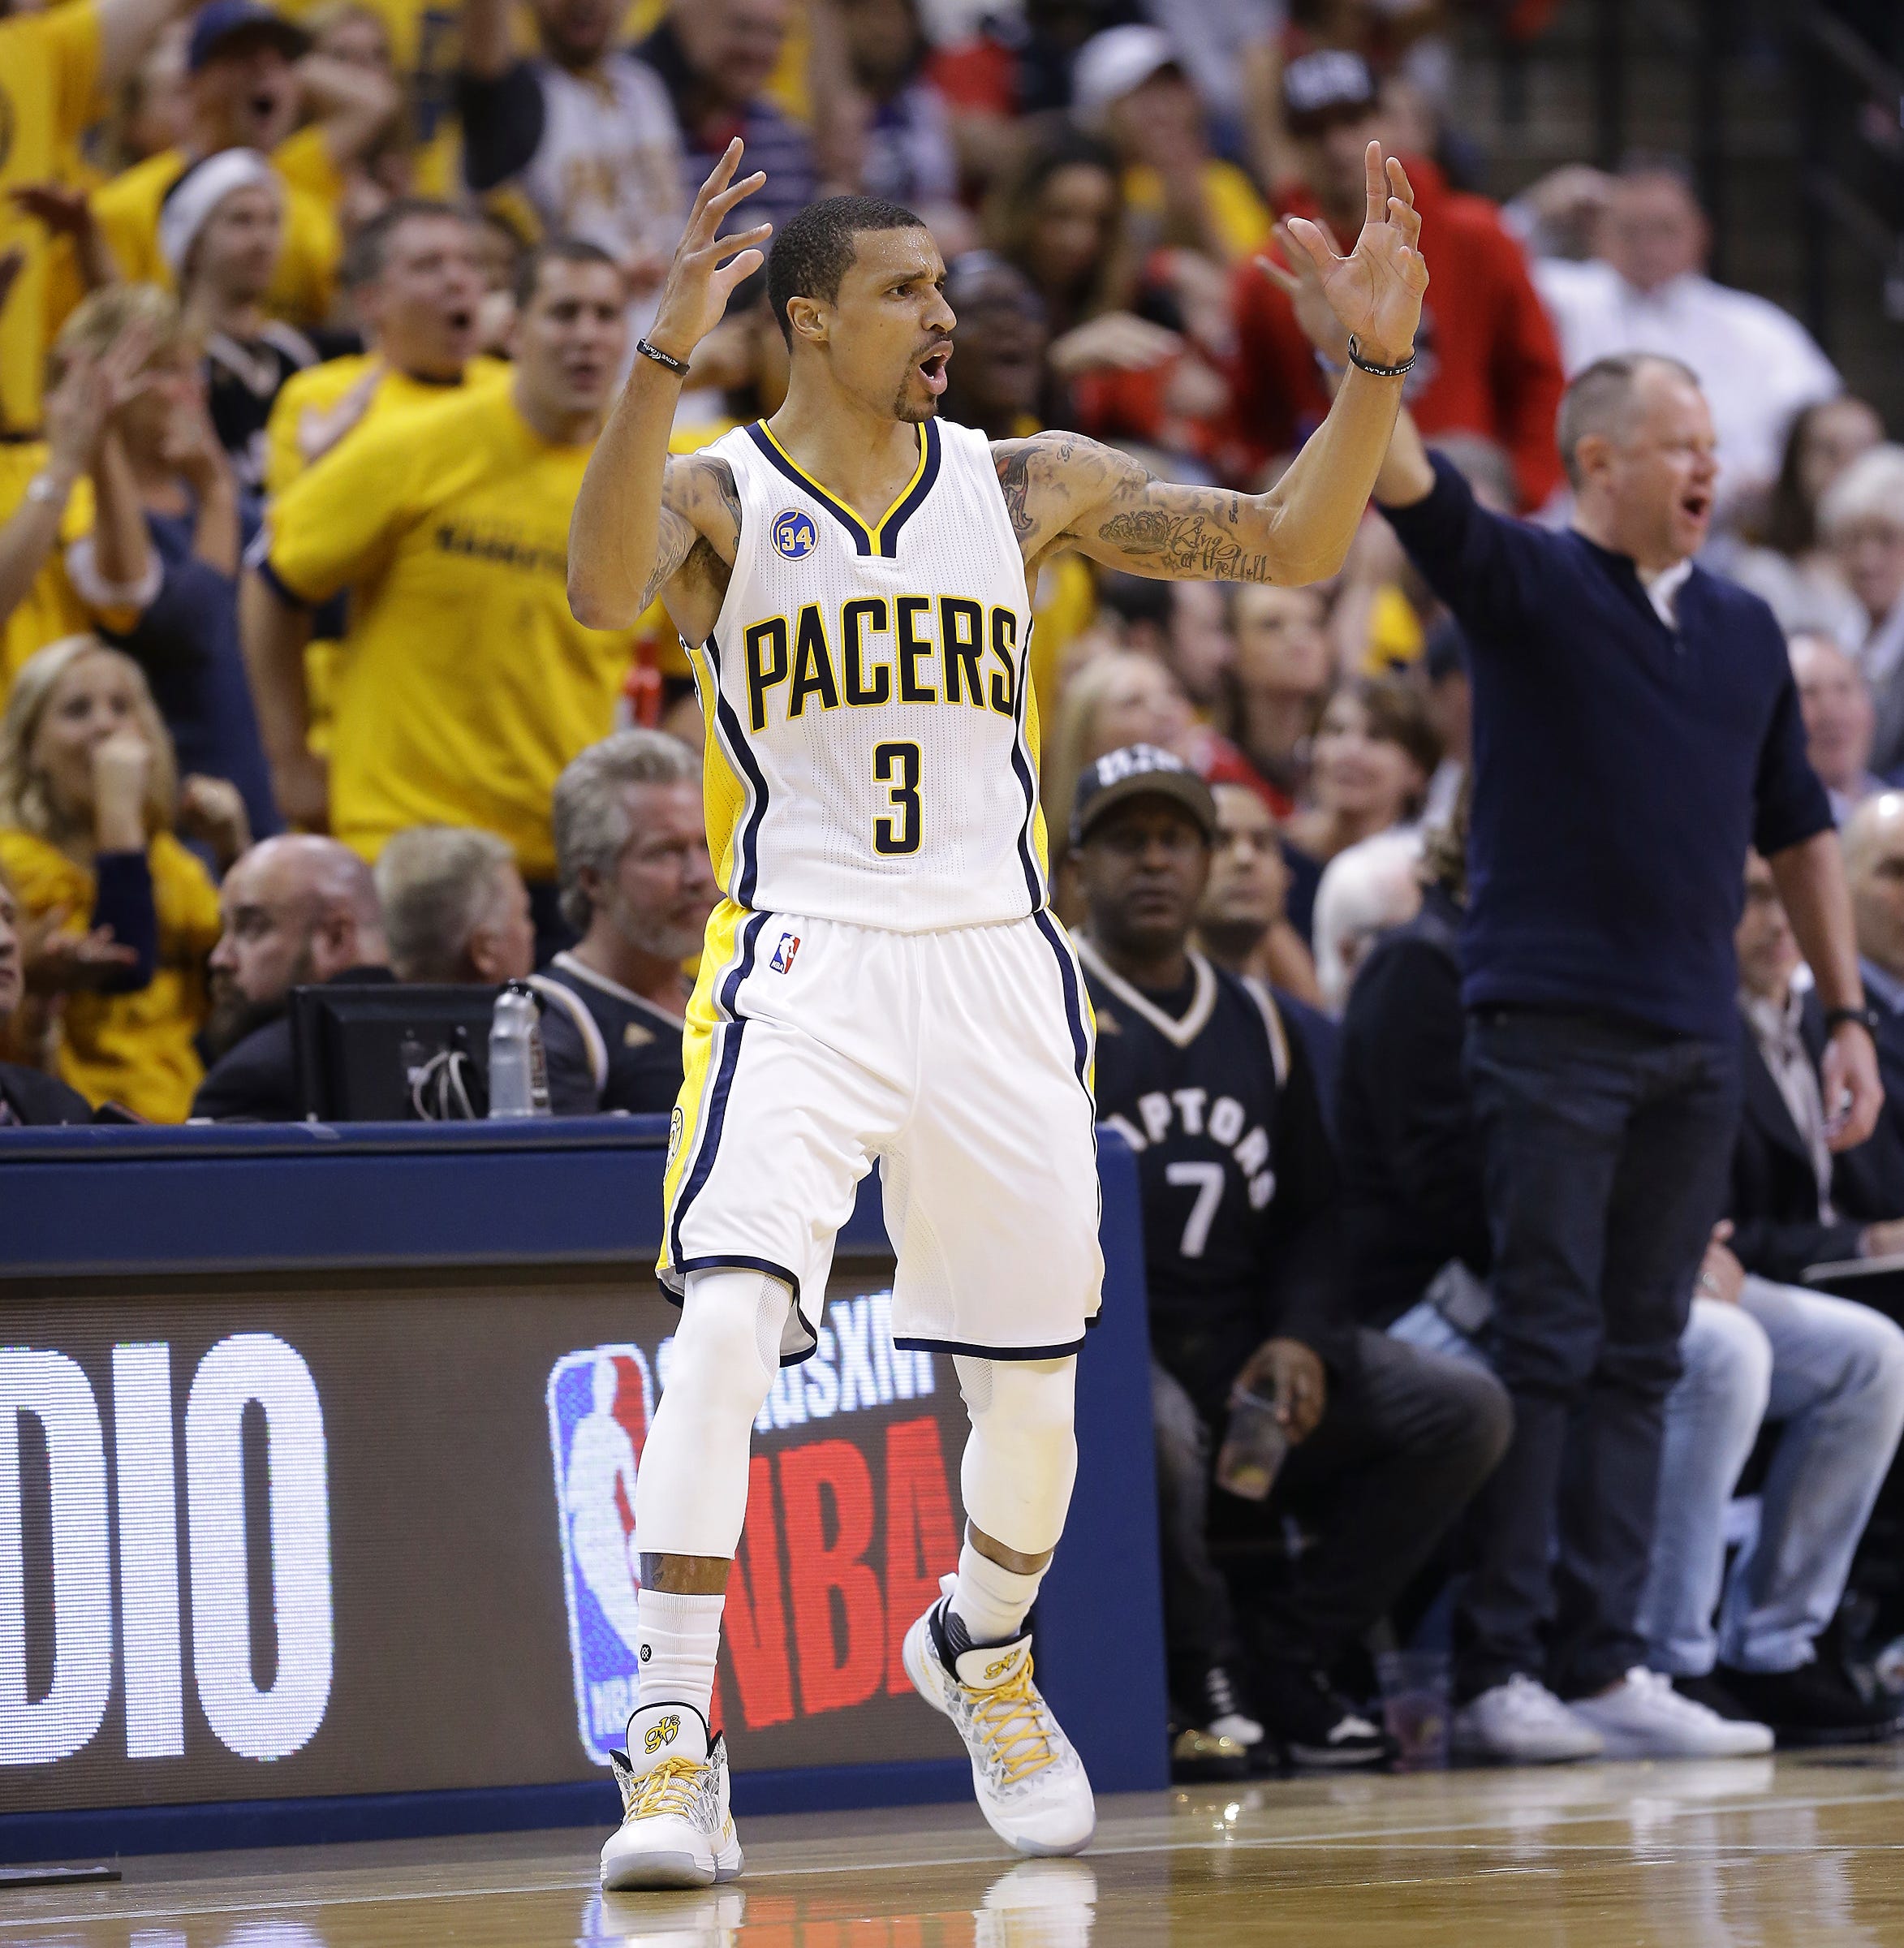 Pacers by their numbers